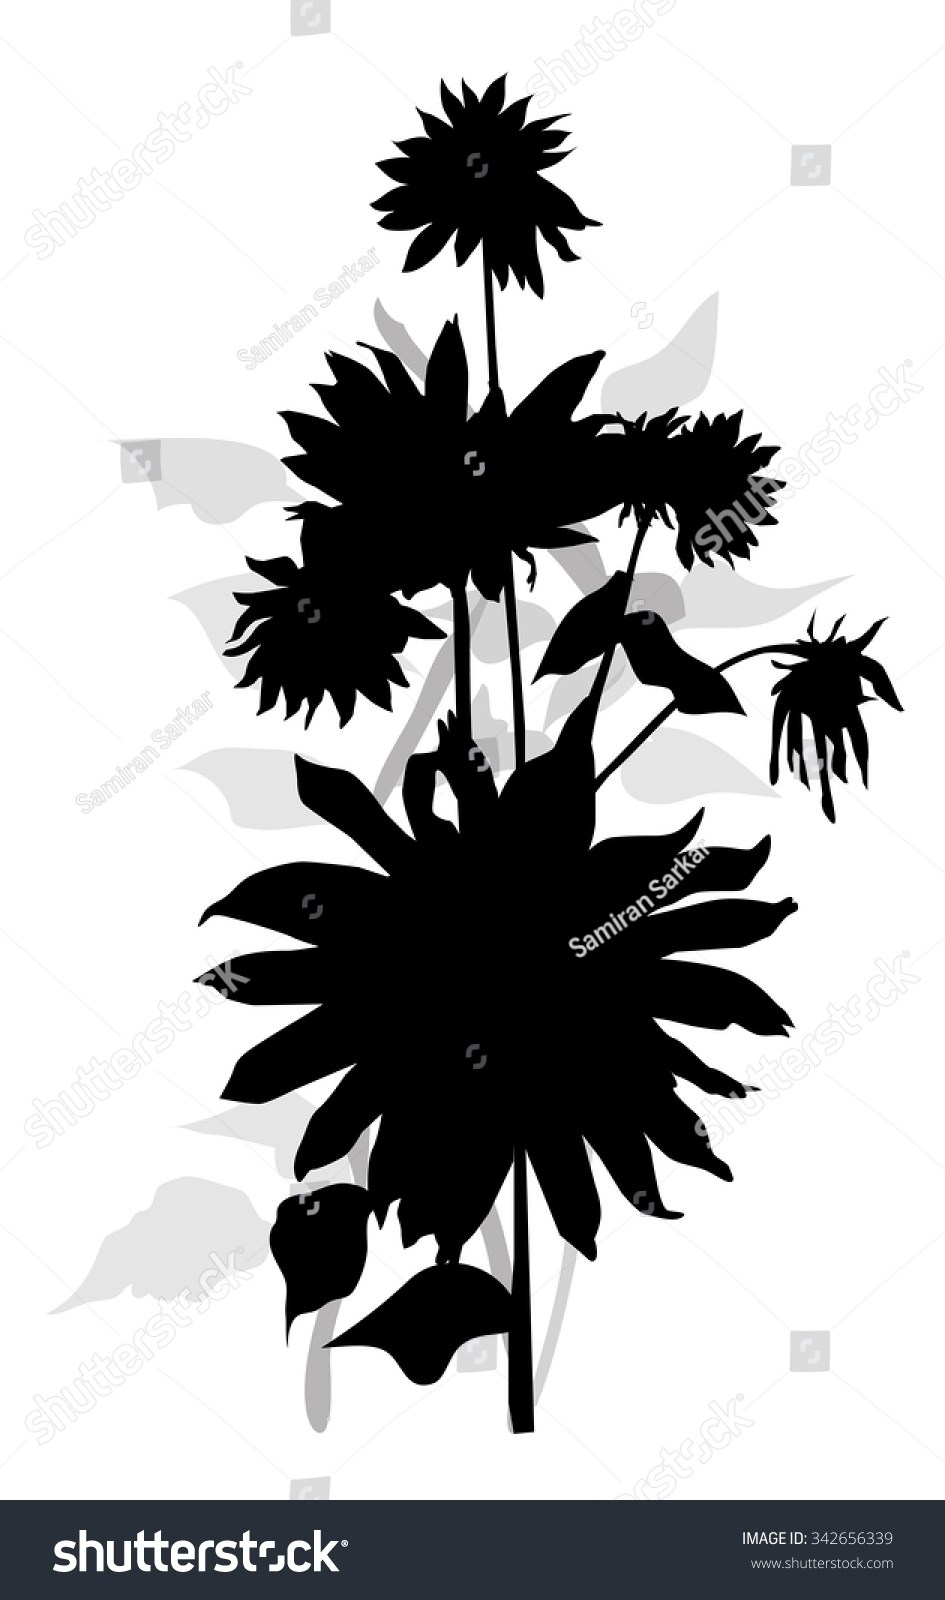 Sunflower Silhouette Vector at Vectorified.com | Collection of